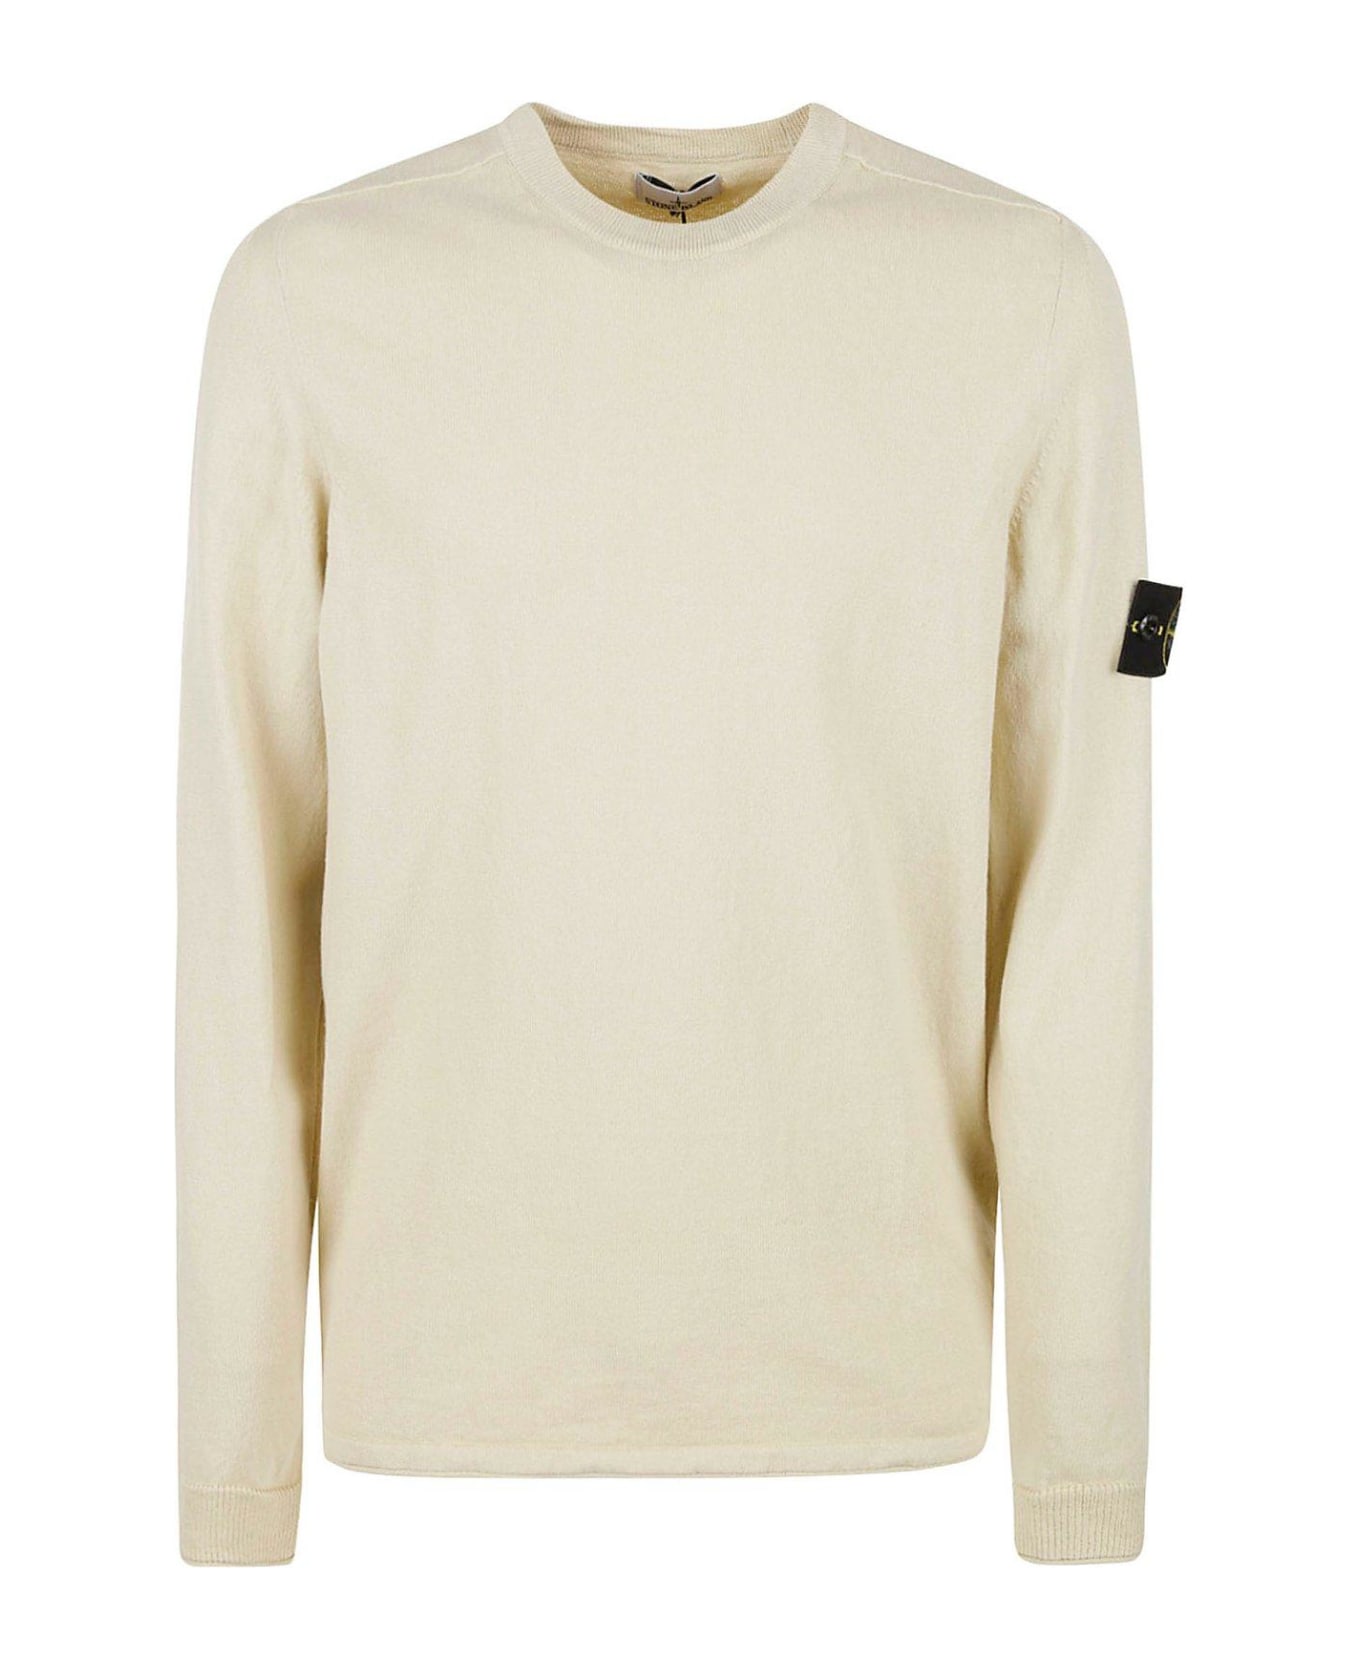 Stone Island Compass Patch Crewneck Knitted Jumper - Beige